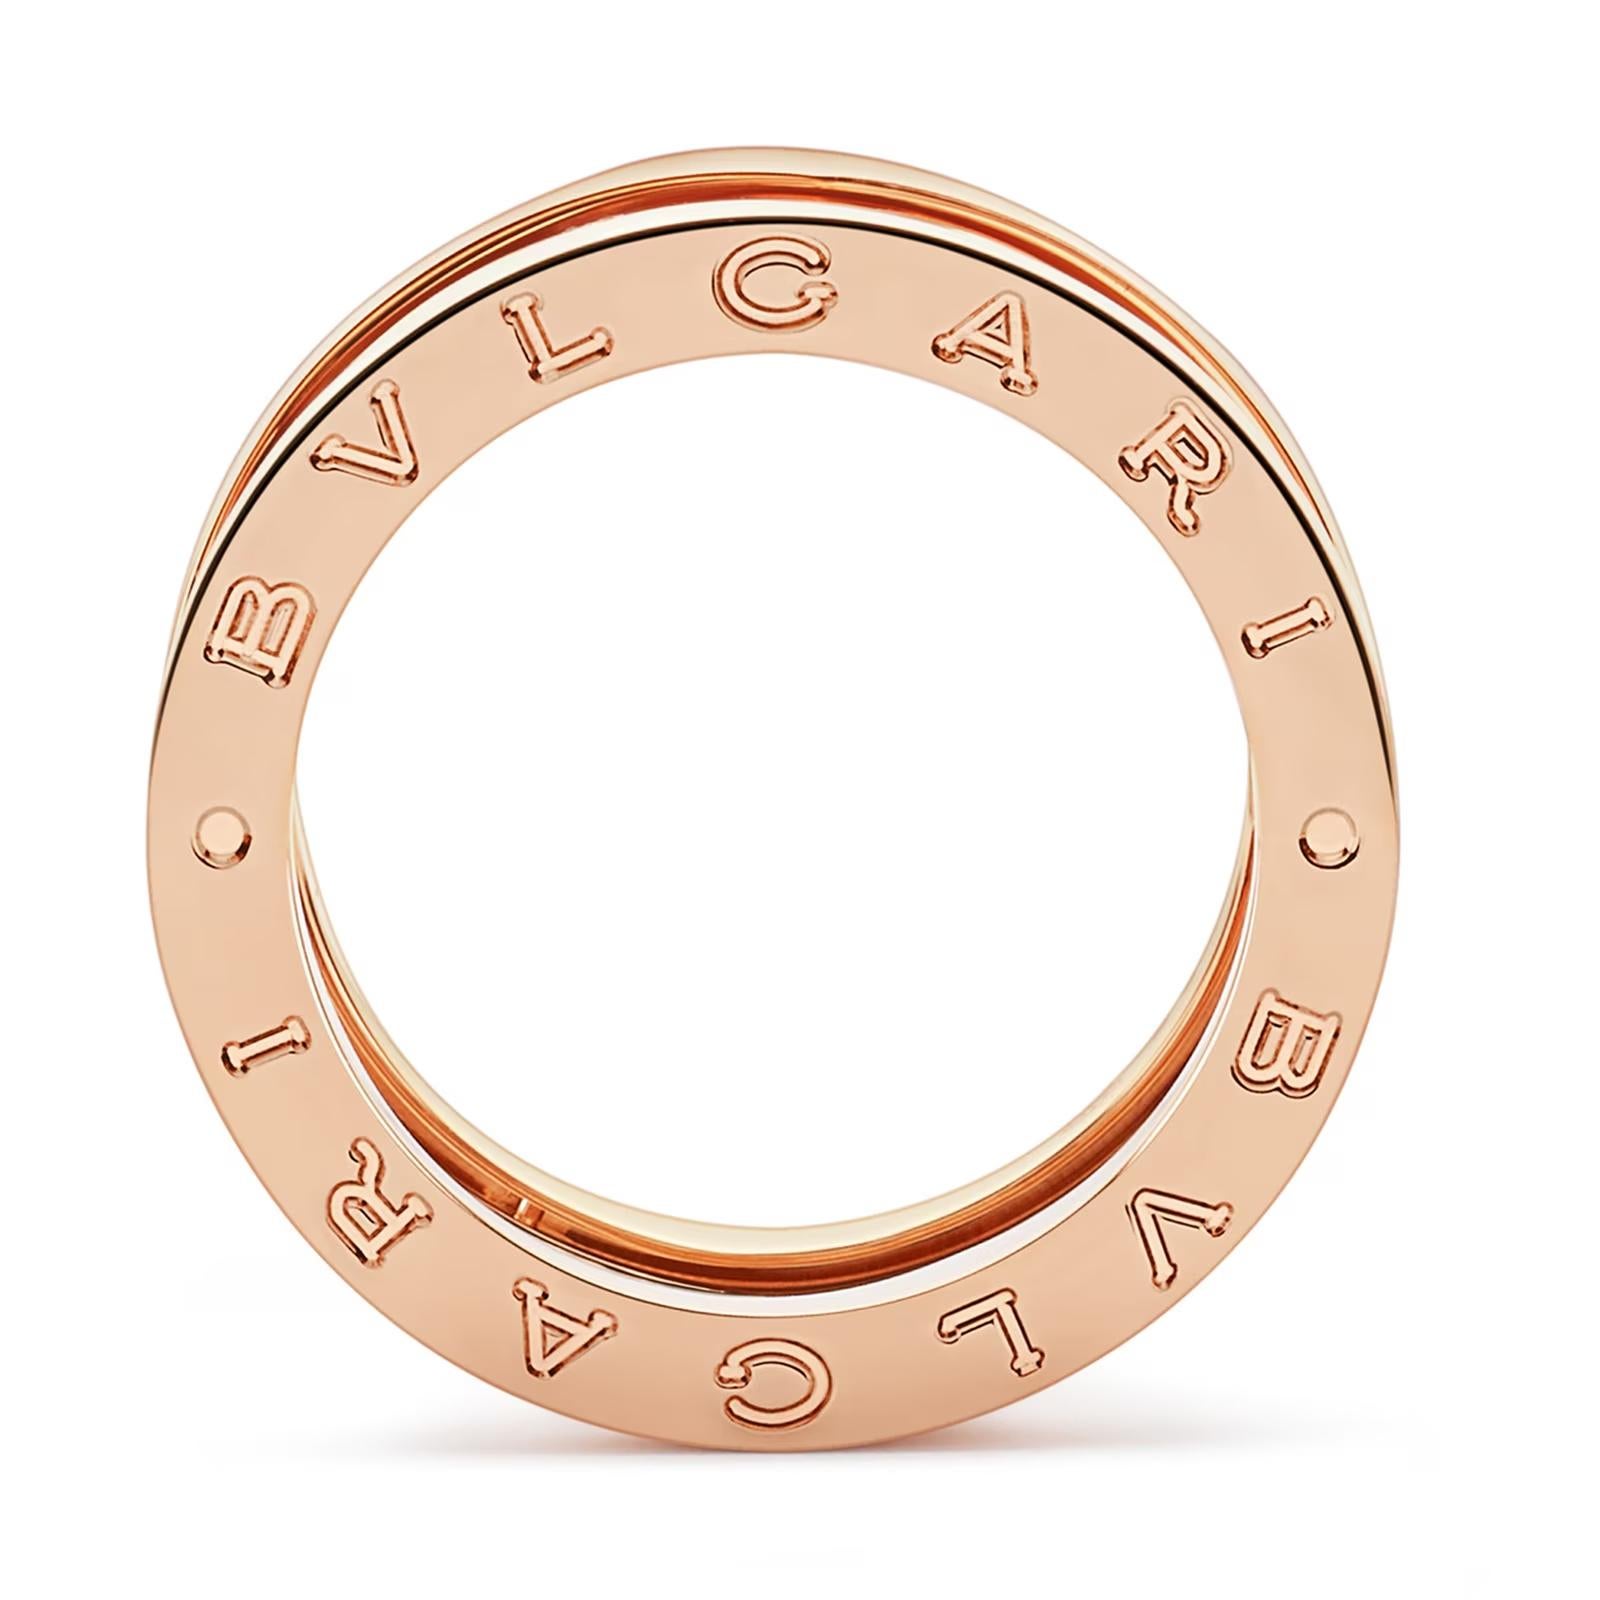 Brand: Bvlgari

Collection: B.Zero1 (Zaha Hadid design)

Style: 3 Band Ring​​​​​​​

Metal: Rose Gold 

Metal Purity: 18K

Ring Size: 7.25 

Total Weight: 13.0 g​​​​​​​

Includes: 24 Month Brilliance Jewels Warranty 

                Bvlgari Box